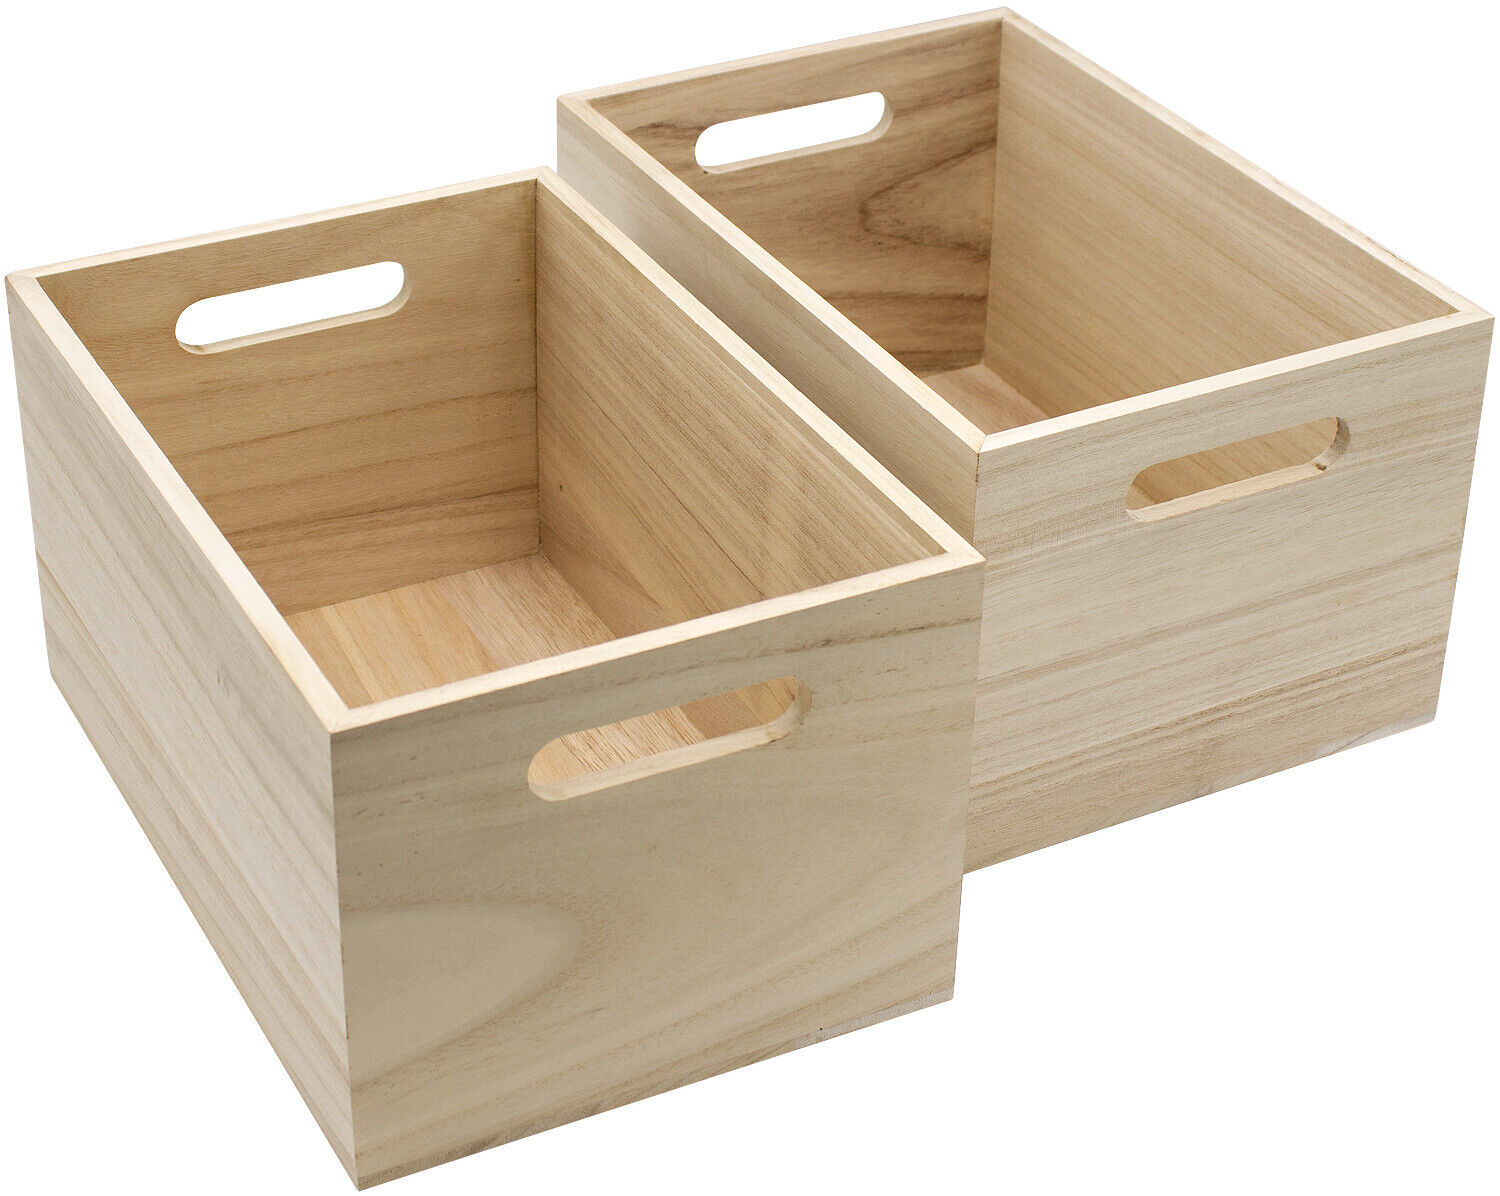 Sorbus Unfinished wood crates, Organizer bins, Wooden box, Cabinet containers - $54.99